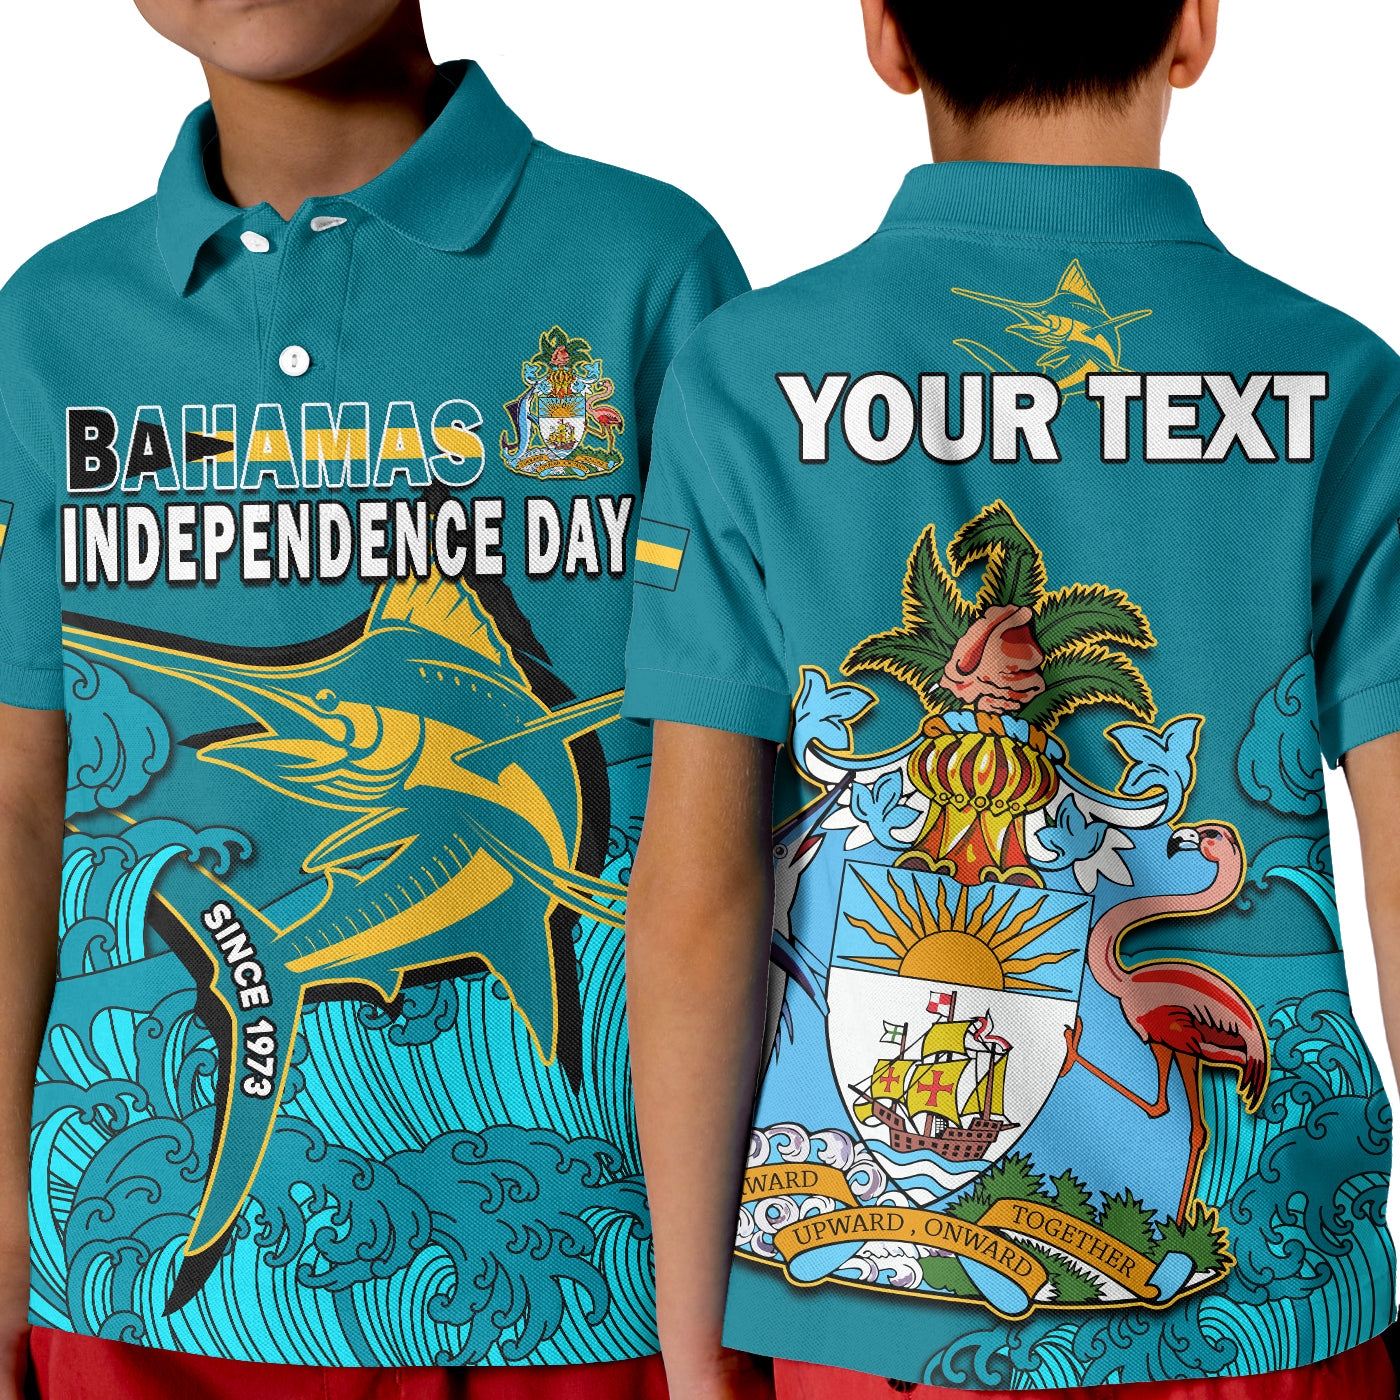 custom-personalised-bahamas-independence-day-polo-shirt-kid-blue-marlin-since-1973-style